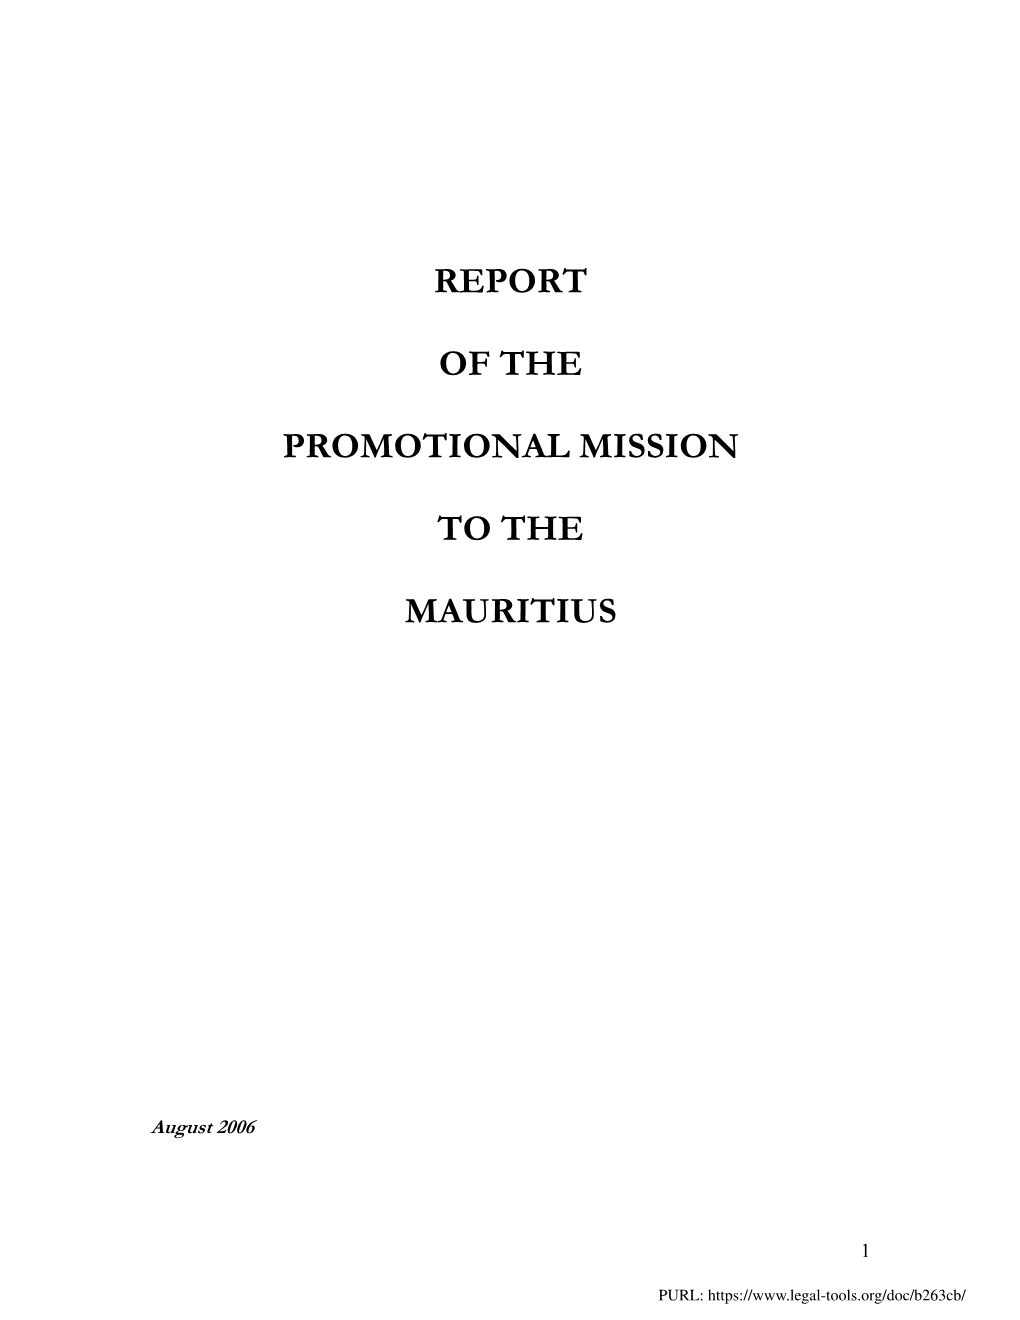 Report of the Promotional Mission To